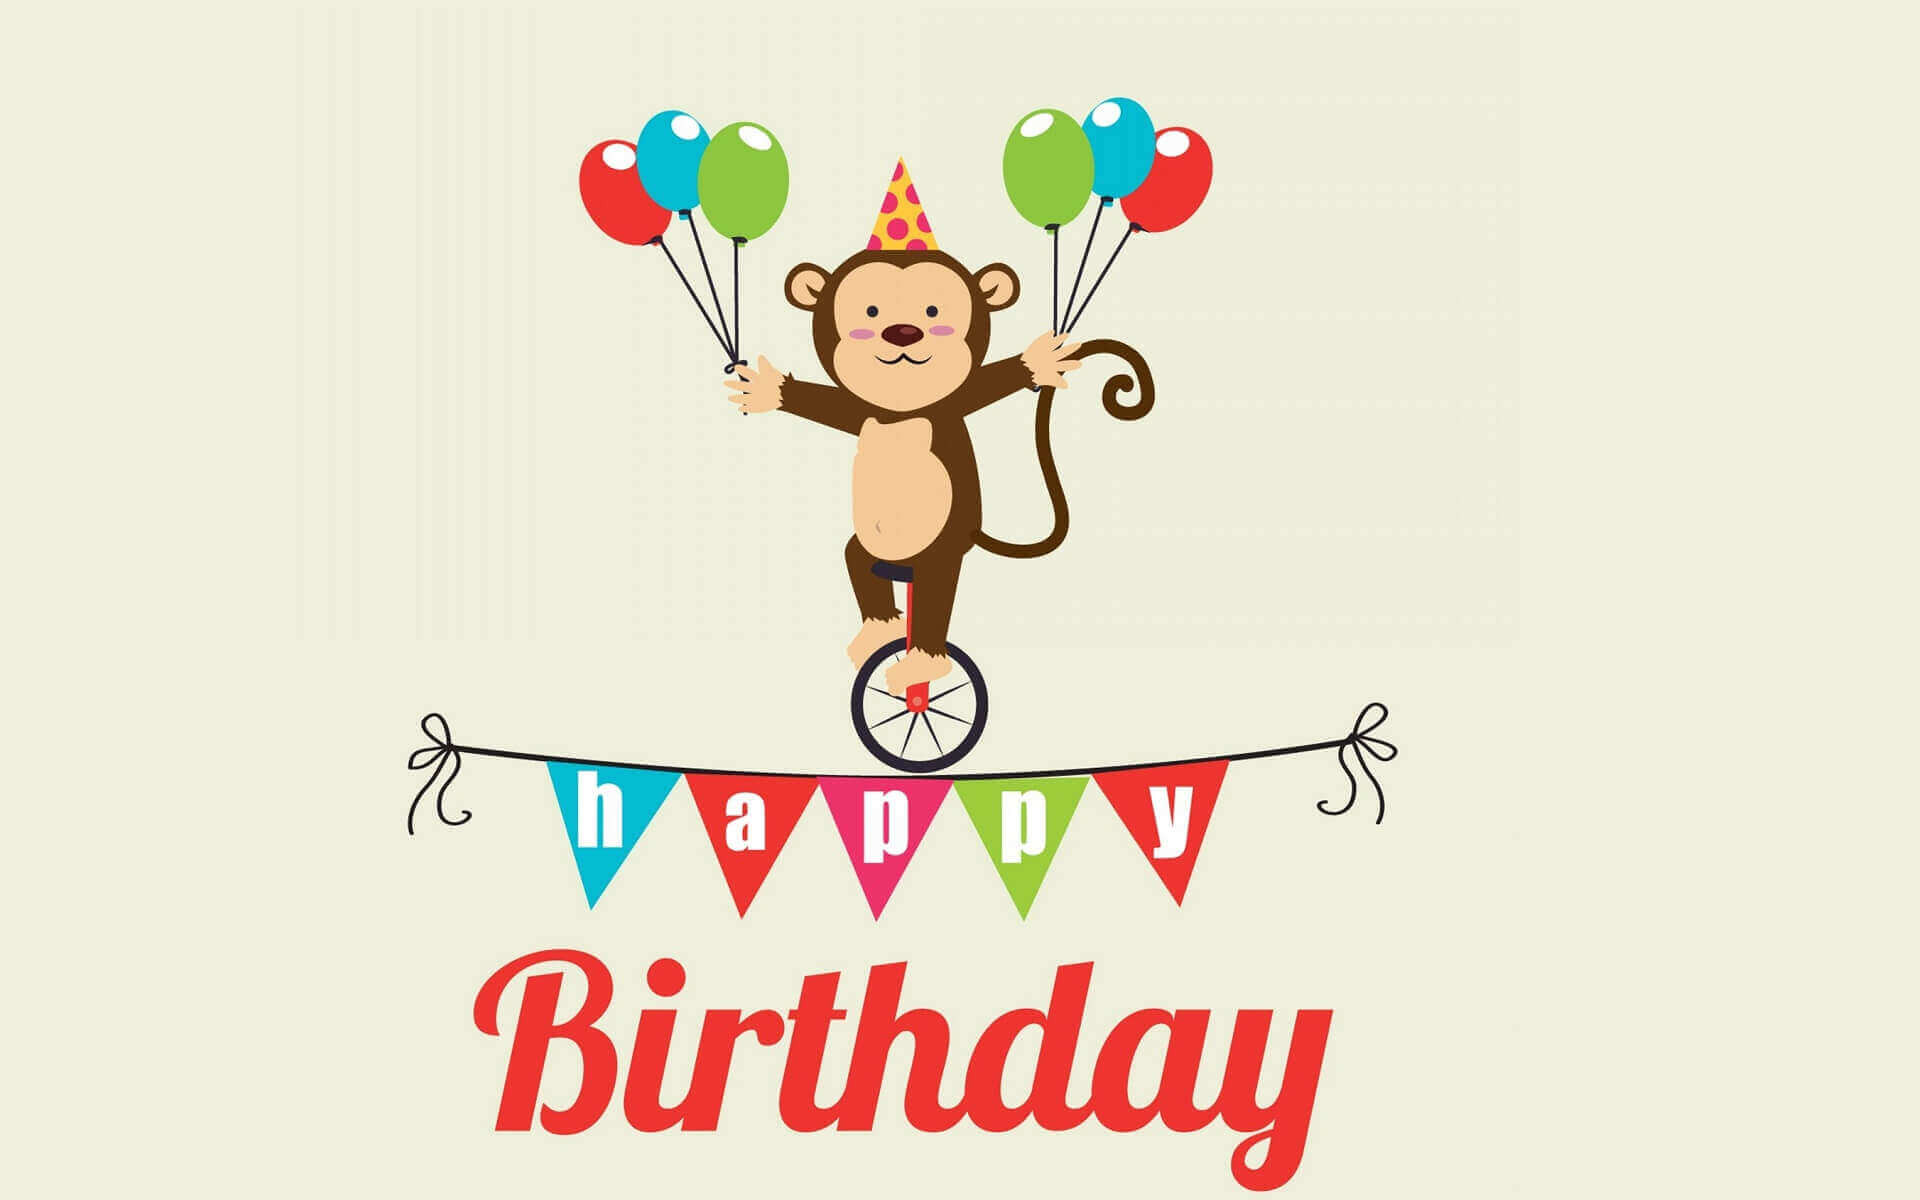 Happy Birthday Wishes For Friend Funny
 200 Funny Happy Birthday Wishes Quotes Ever FungiStaaan